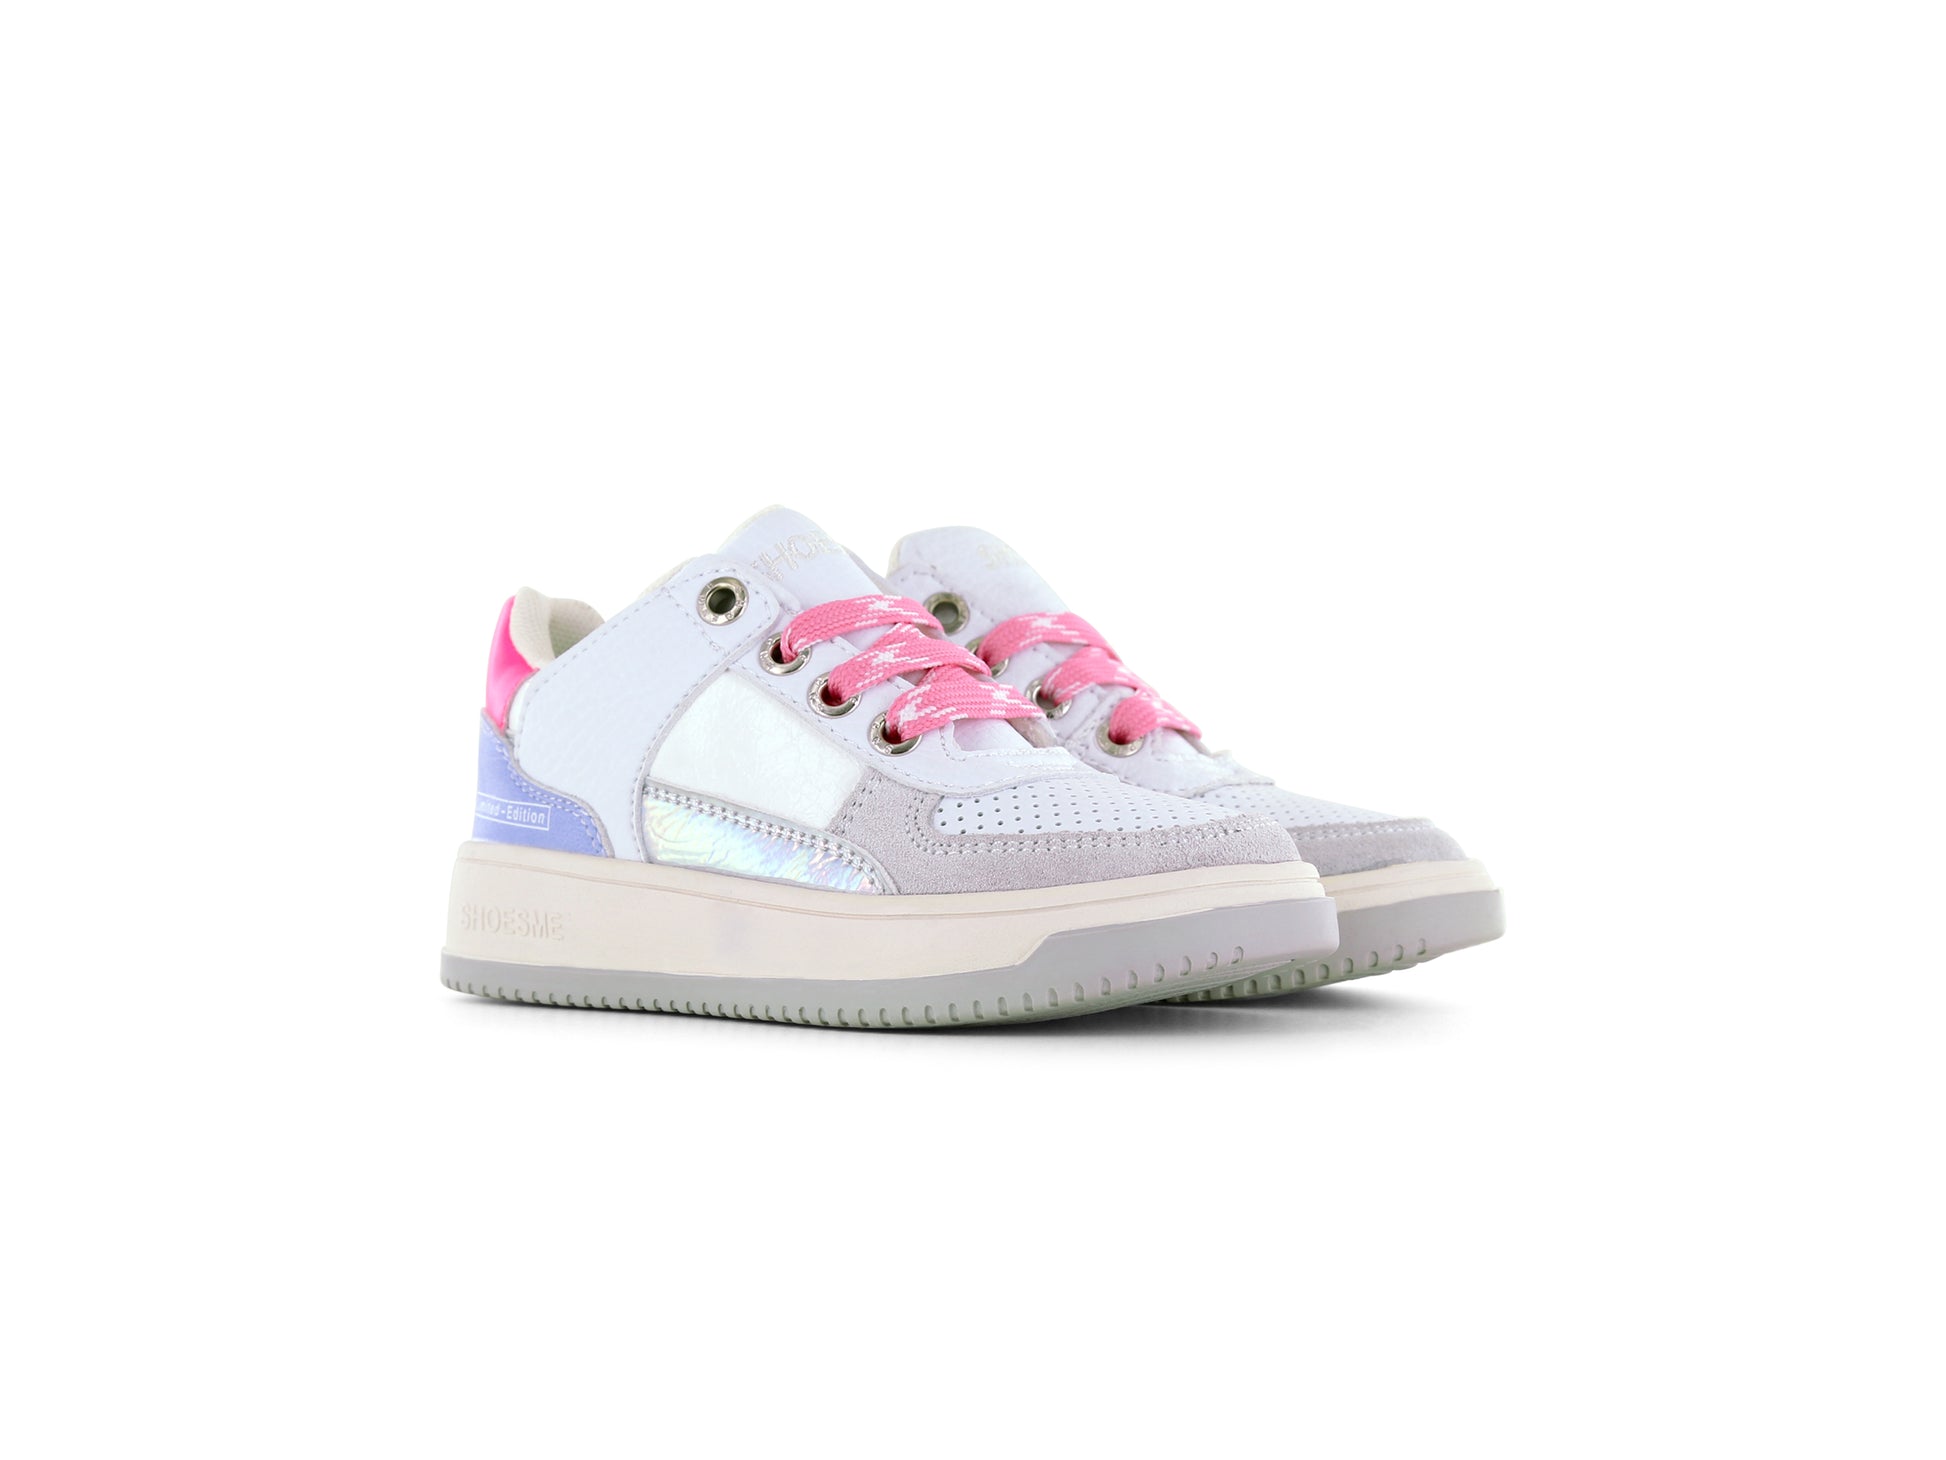 A pair of girl's chunky trainer's by Shoesme, style NO24S003-A, in white leather with pink and lilac trim set on a cream sole unit.
Pink lace and zip fastening.
Right side view.